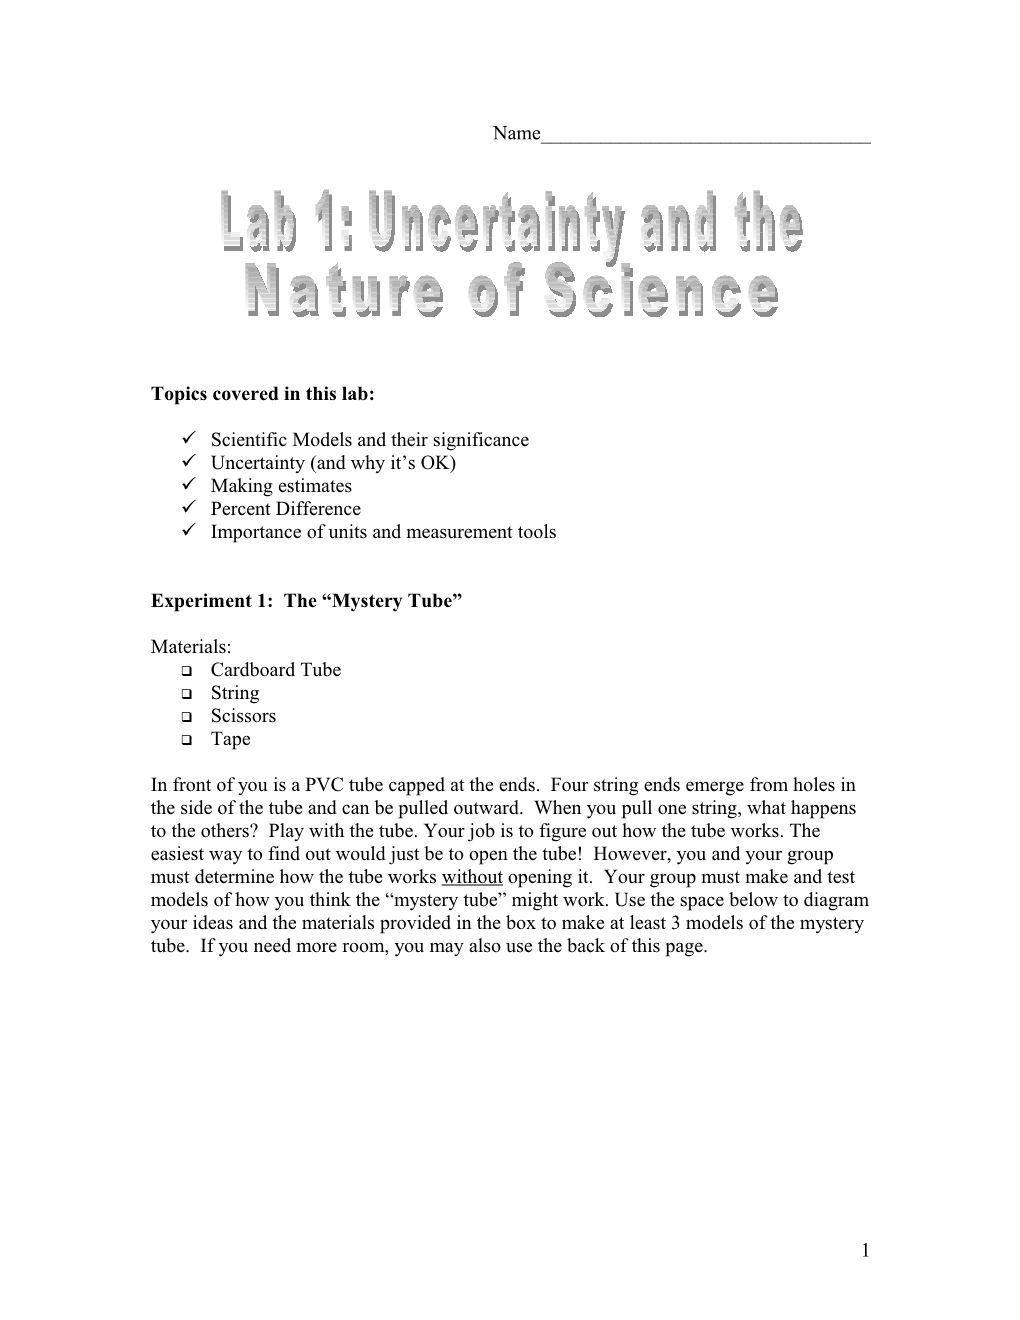 Uncertainty and the Nature of Science Lab 1